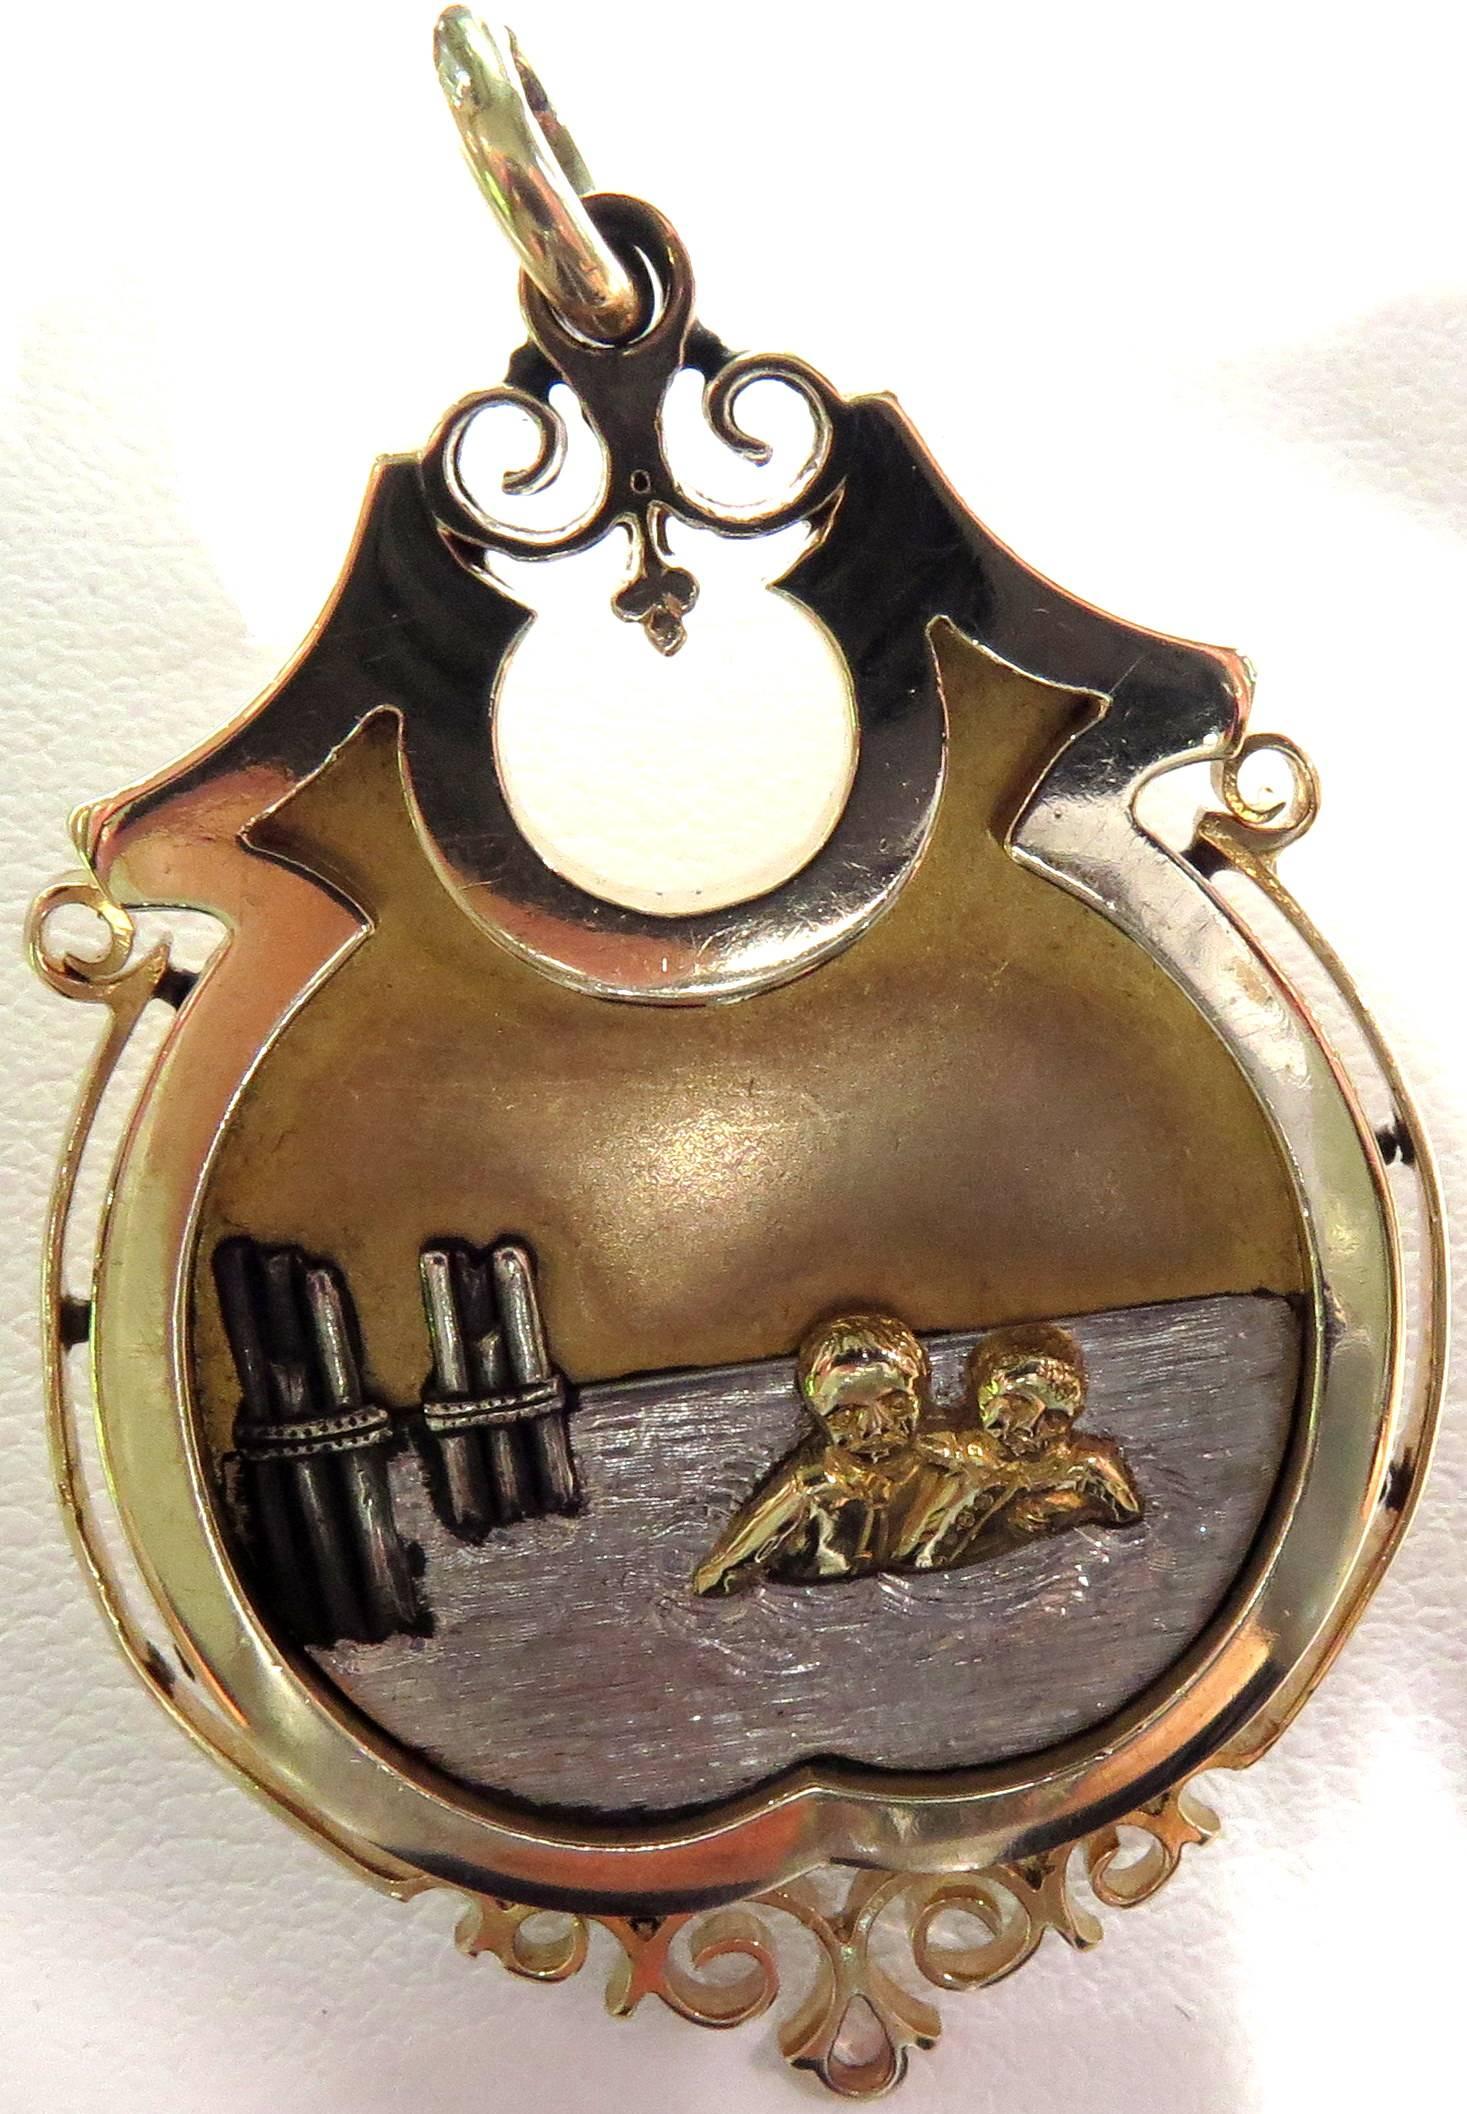 This incredibly detailed 14k Gold Medal was awarded to Howard Soule for his heroism in rescuing Willie Pomeroy form drowning in the river at Rush St. bridge April 22, 1892.   On the front of this medal is a scene depicting the rescue of Willie